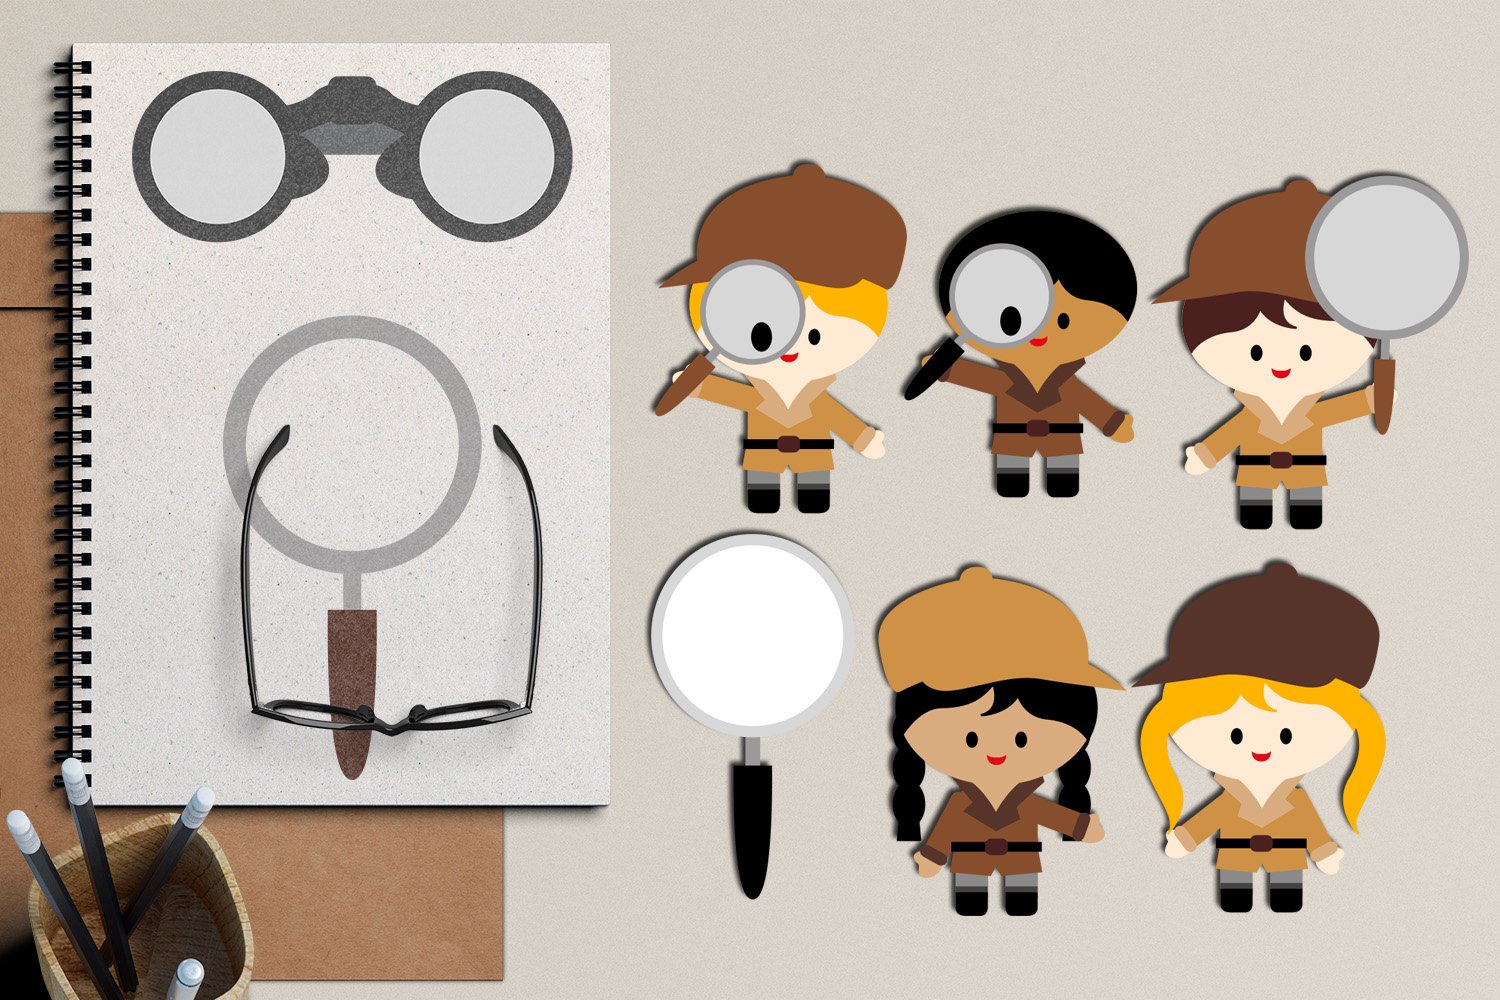 3 male detectives with a magnifying glass, 2 female detectives, a magnifying glass, glasses and a notepad with a picture of binoculars and a magnifying glass.